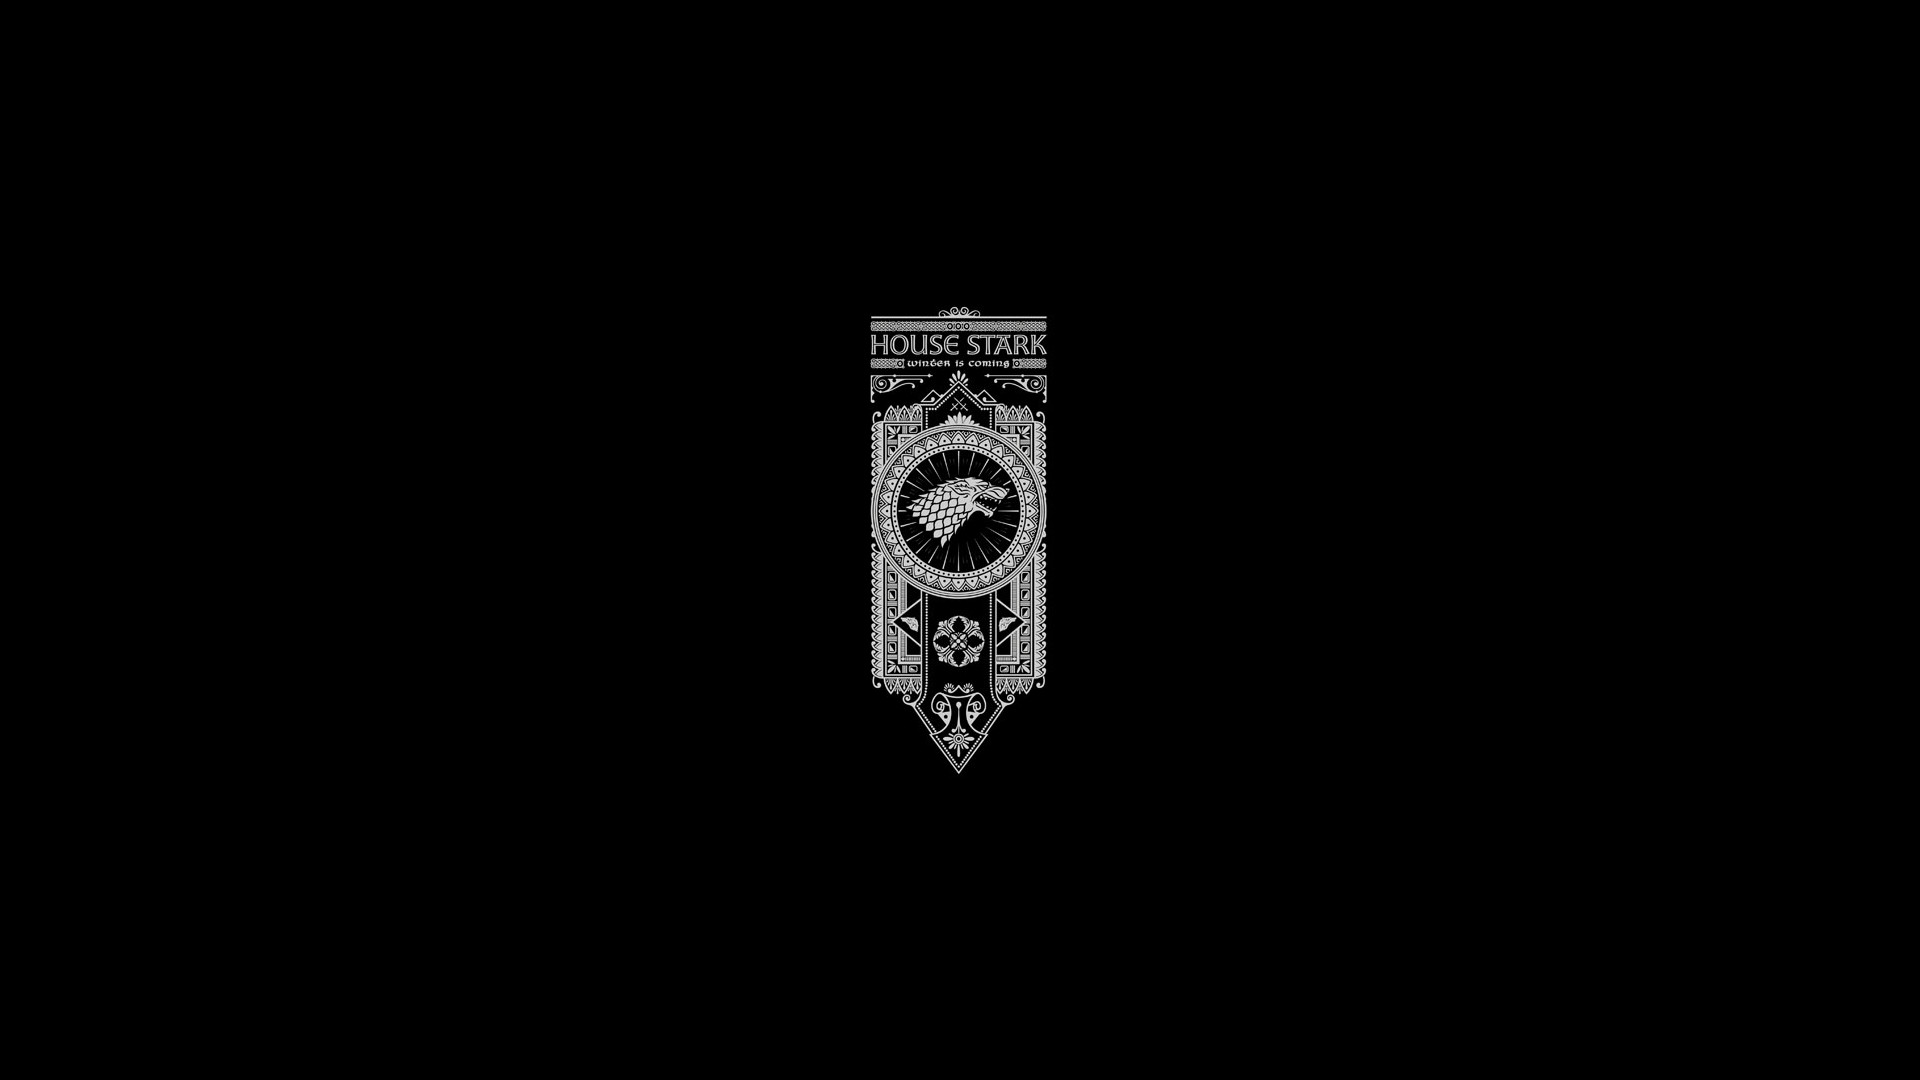 1920x1080 House Stark Wallpapers - Wallpaper Cave